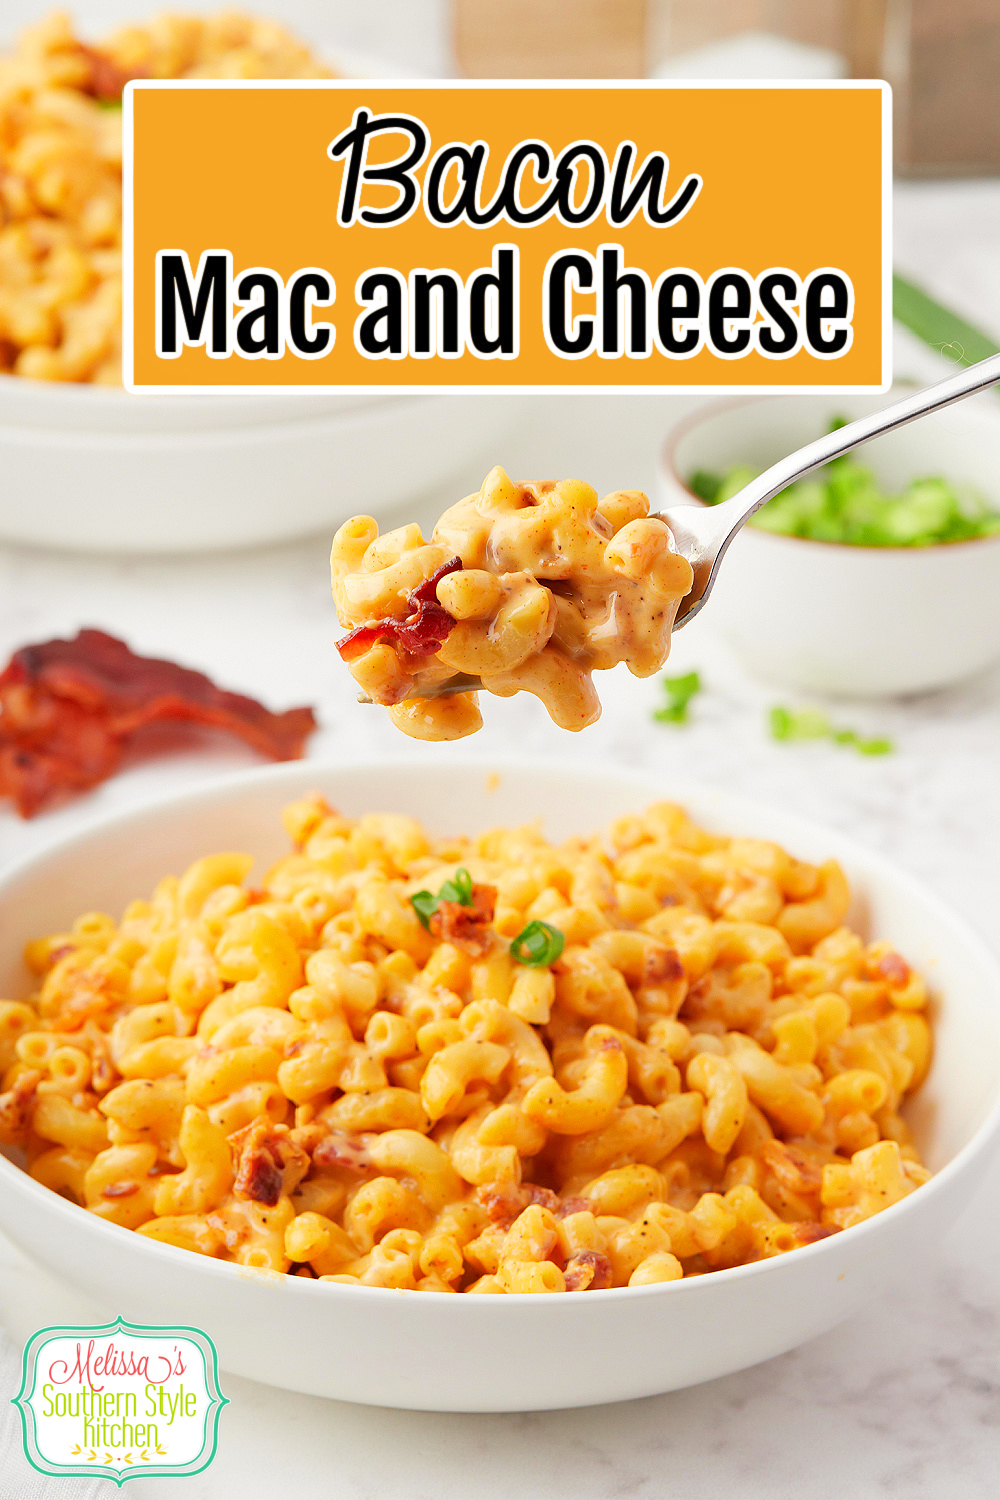 This Easy Bacon Mac and Cheese recipe can be served as a delicious main dish or a side dish for busy day meals with the family. #macaroniandcheese #baconmac #baconmacandcheese #macaronirecipes #bacon #southernmacaroniandcheese #stovetopmacandcheese via @melissasssk